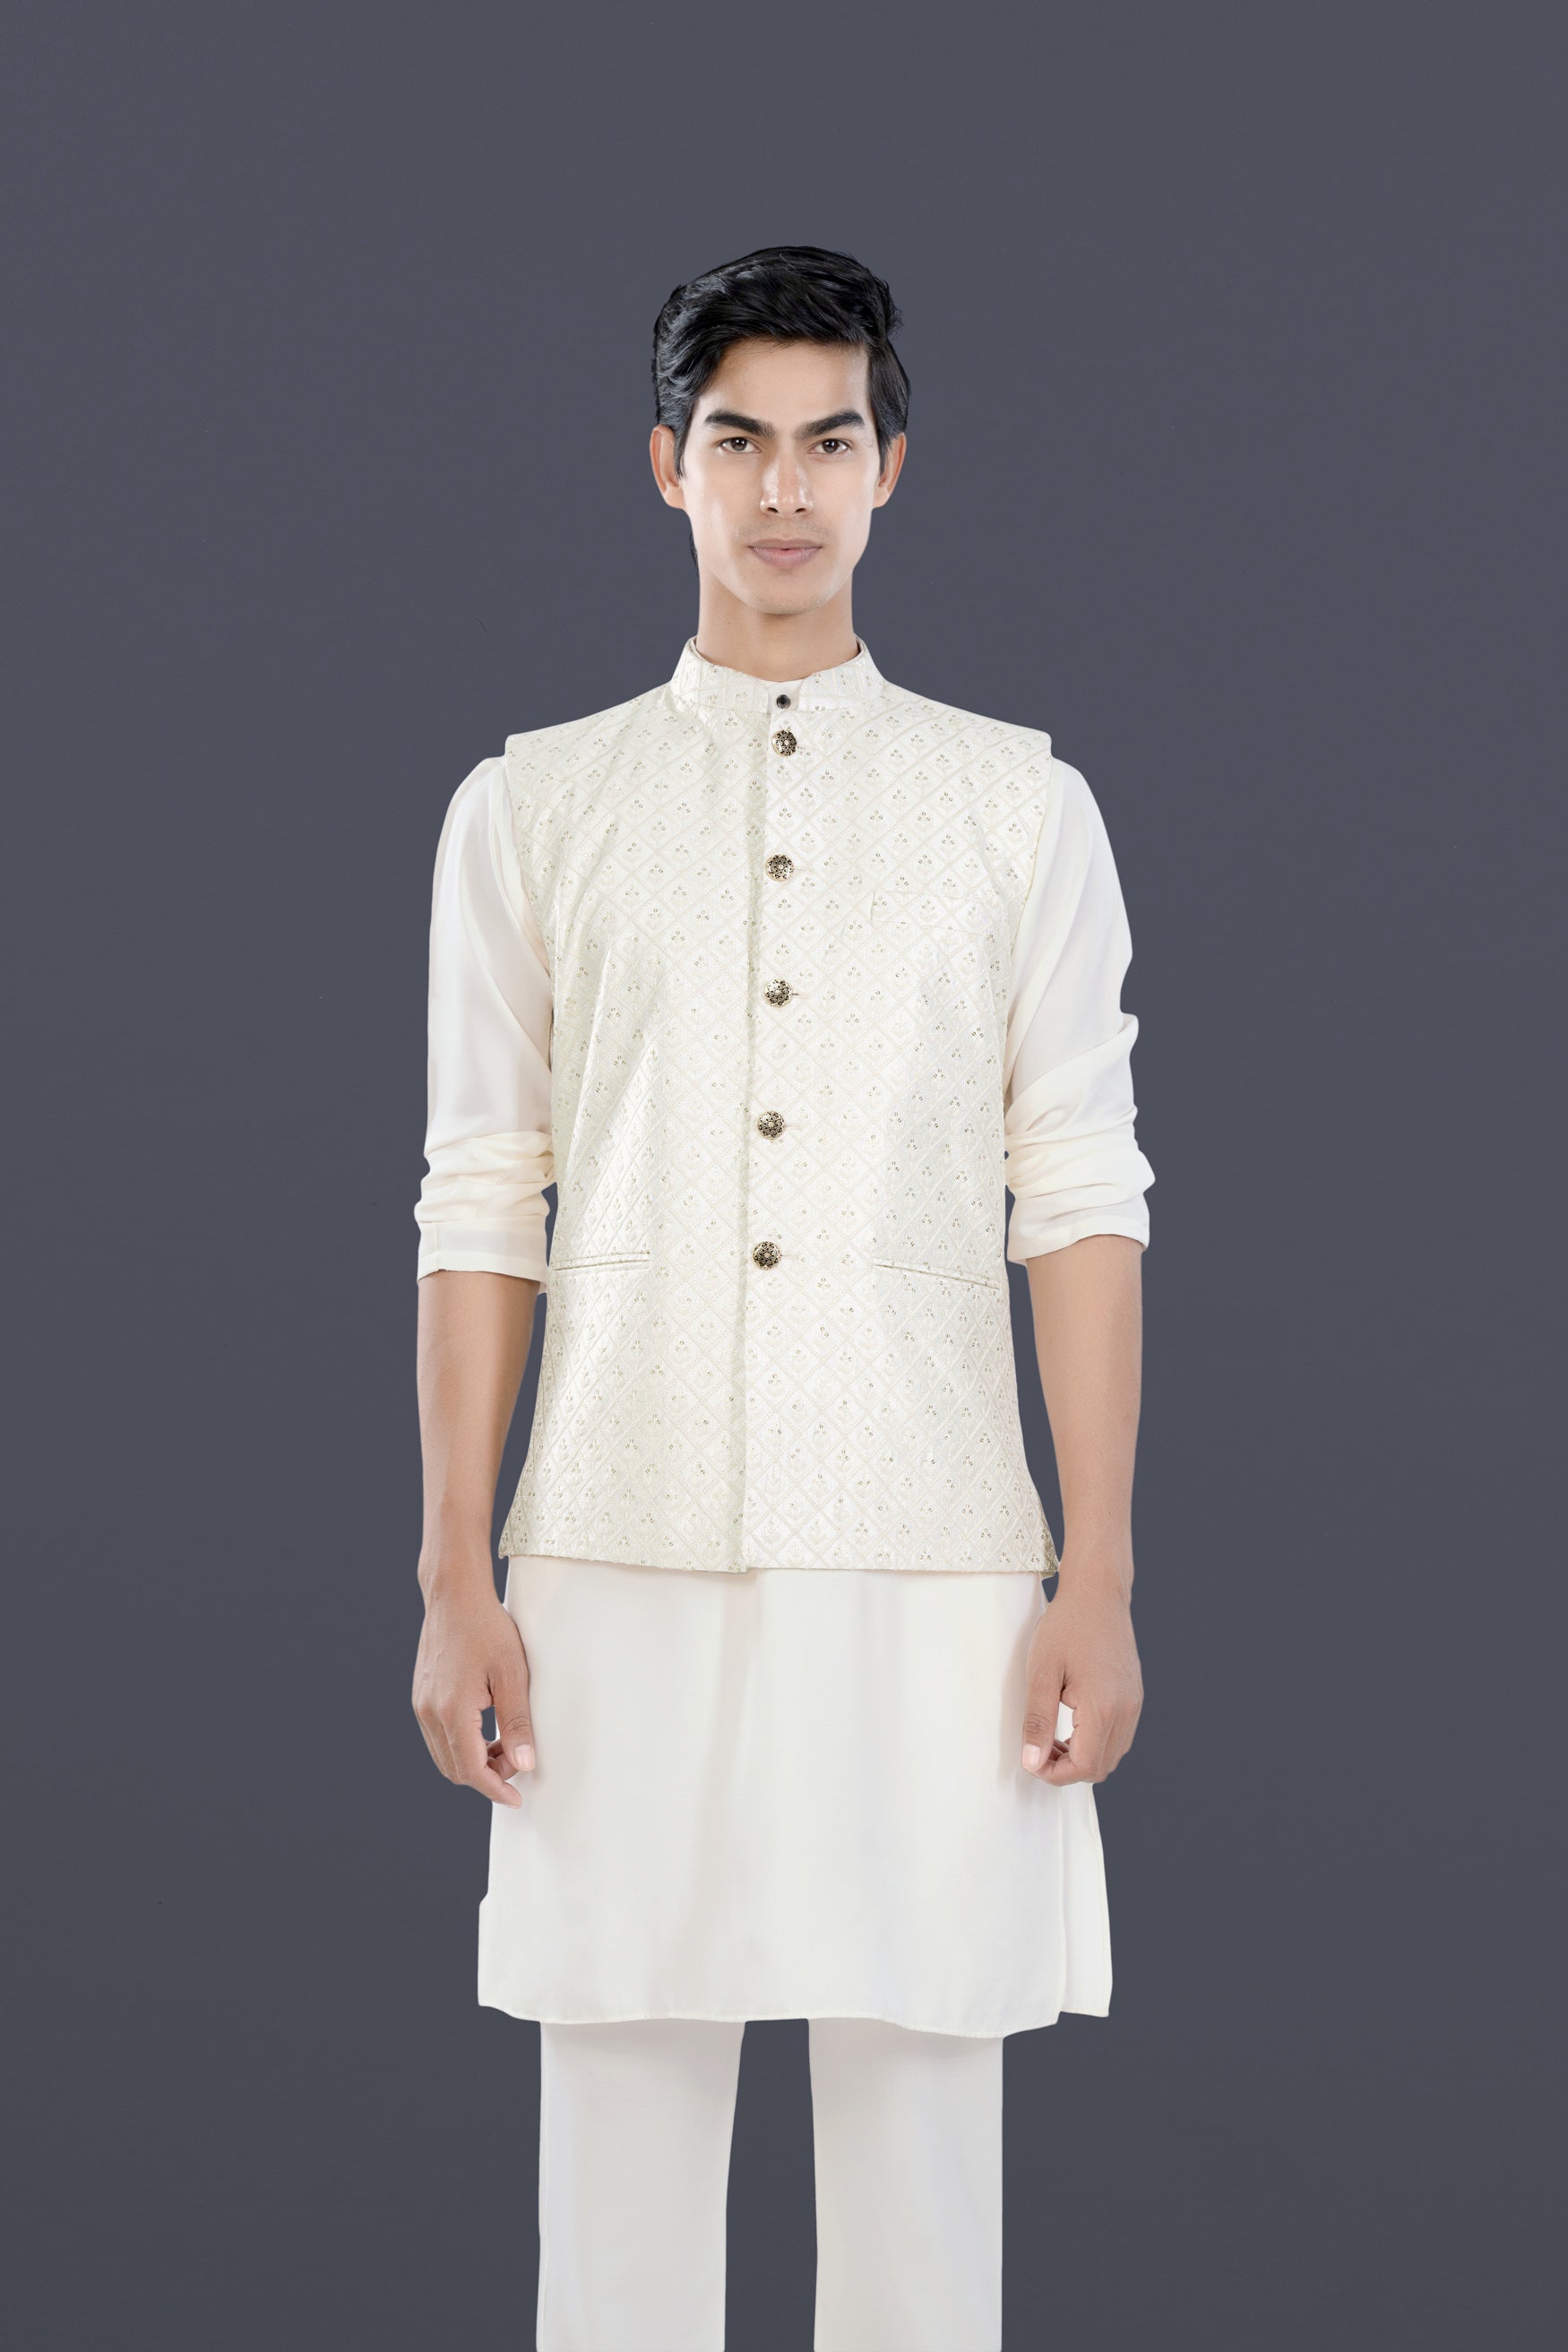 Bright White Trellis Sequin and Thread Embroidered Designer Nehru Jacket WC3474-36,  WC3474-38,  WC3474-40,  WC3474-42,  WC3474-44,  WC3474-46,  WC3474-48,  WC3474-50,  WC3474-52,  WC3474-54,  WC3474-56,  WC3474-58,  WC3474-60